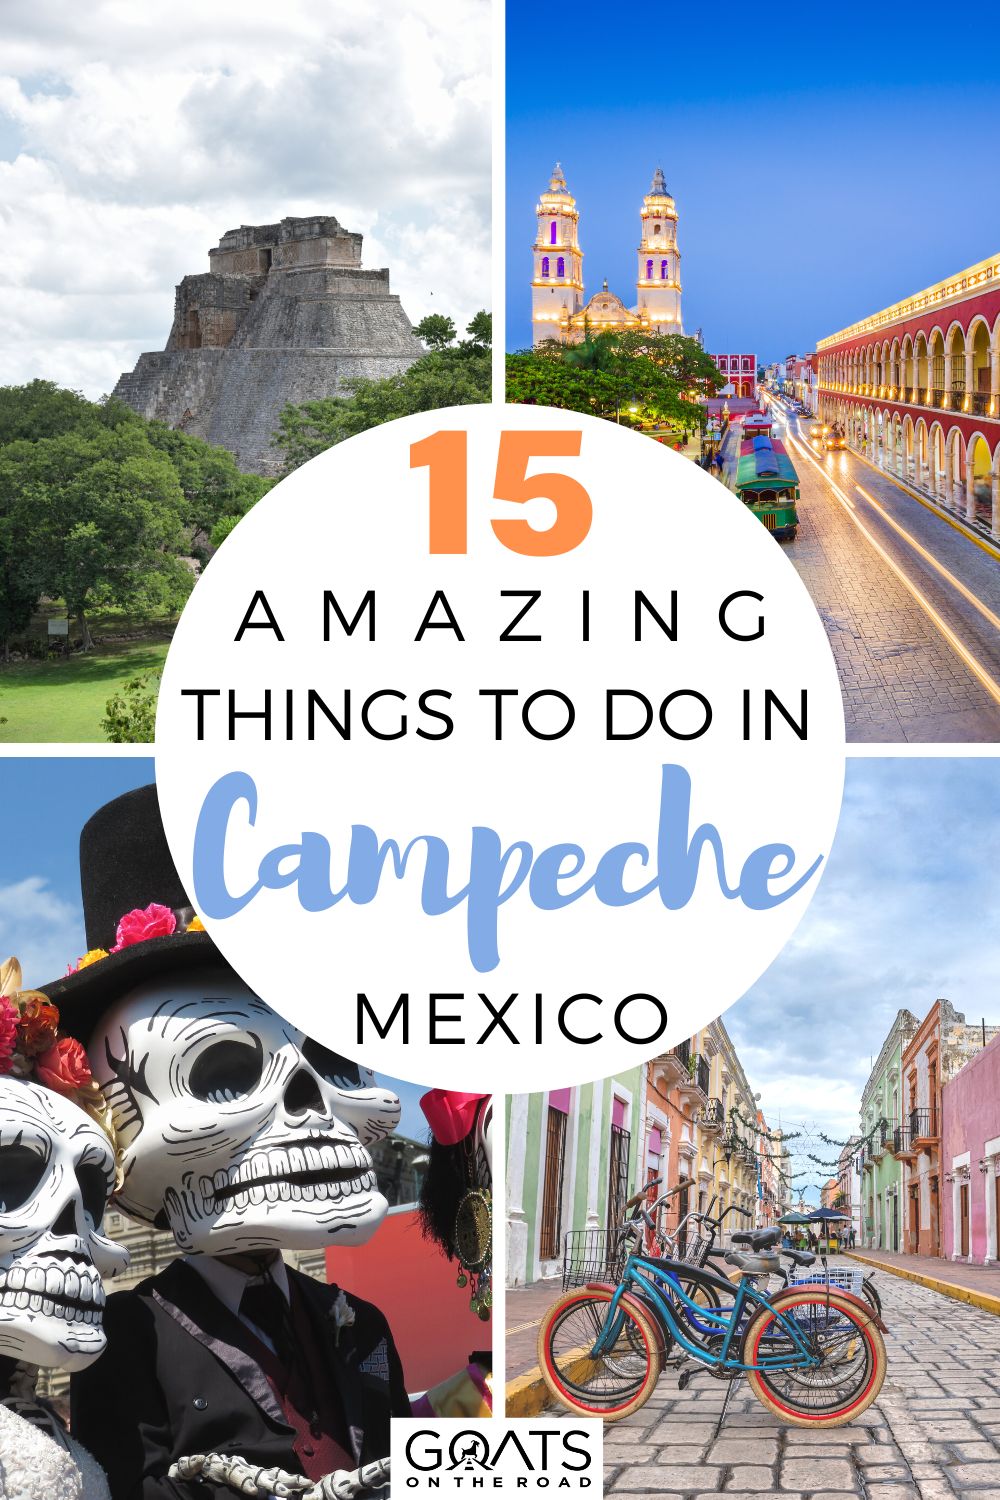 15 Amazing Things To Do in Campeche, Mexico